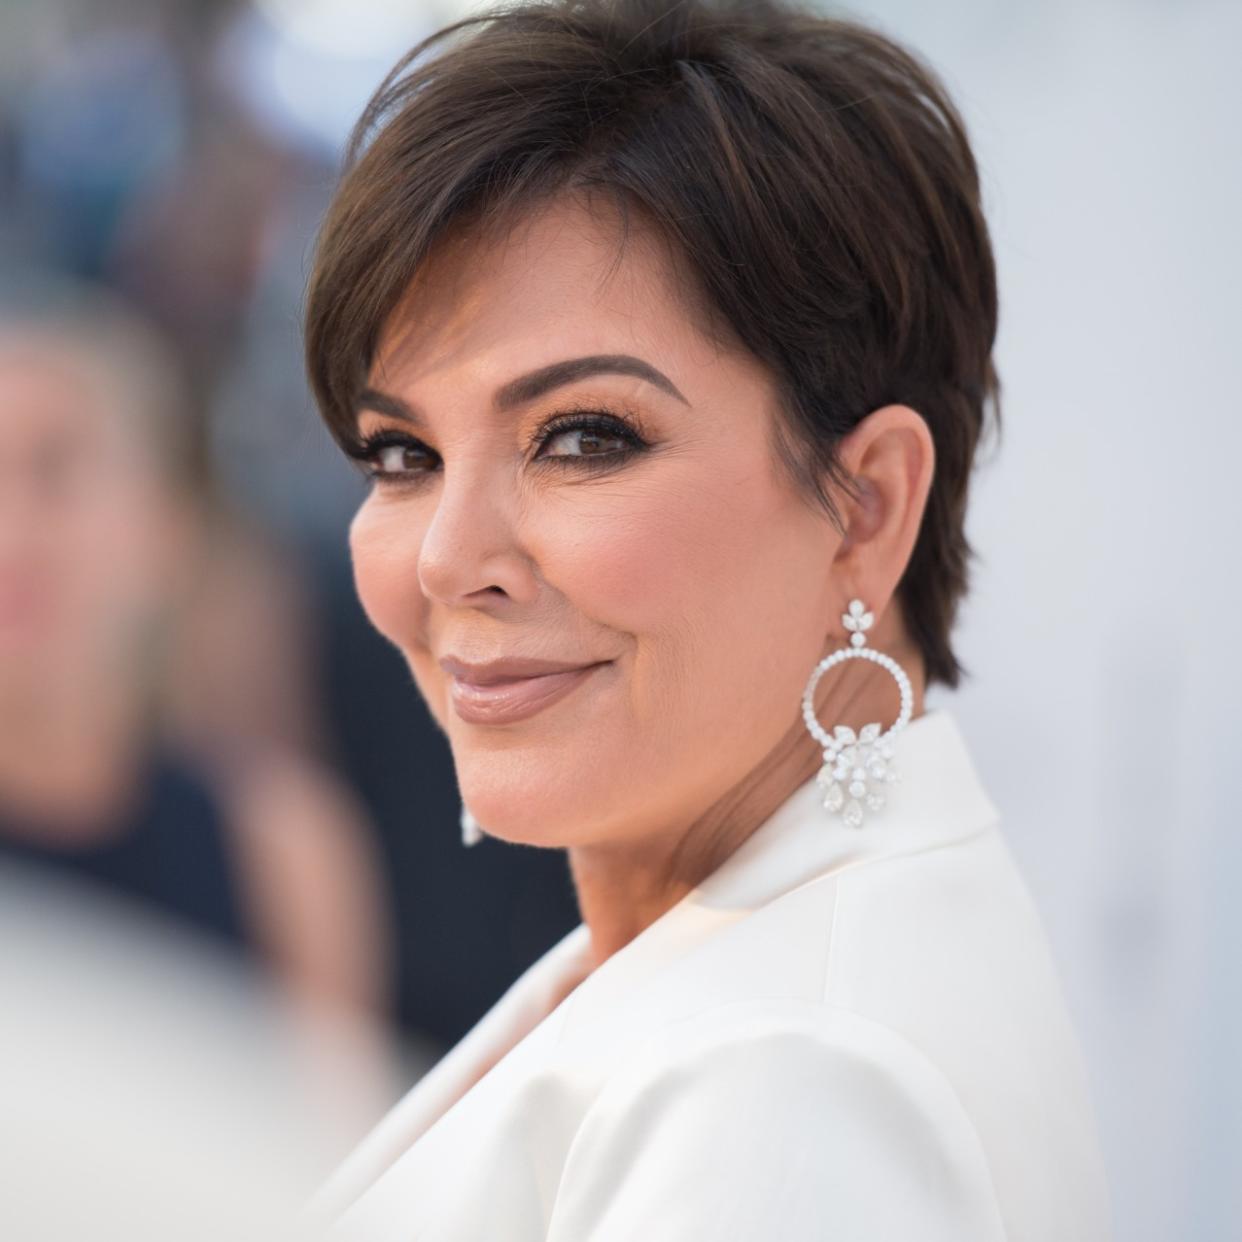  Kris Jenner attends the amfAR Cannes Gala 2019 at Hotel du Cap-Eden-Roc on May 23, 2019 in Cap d'Antibes, France. 